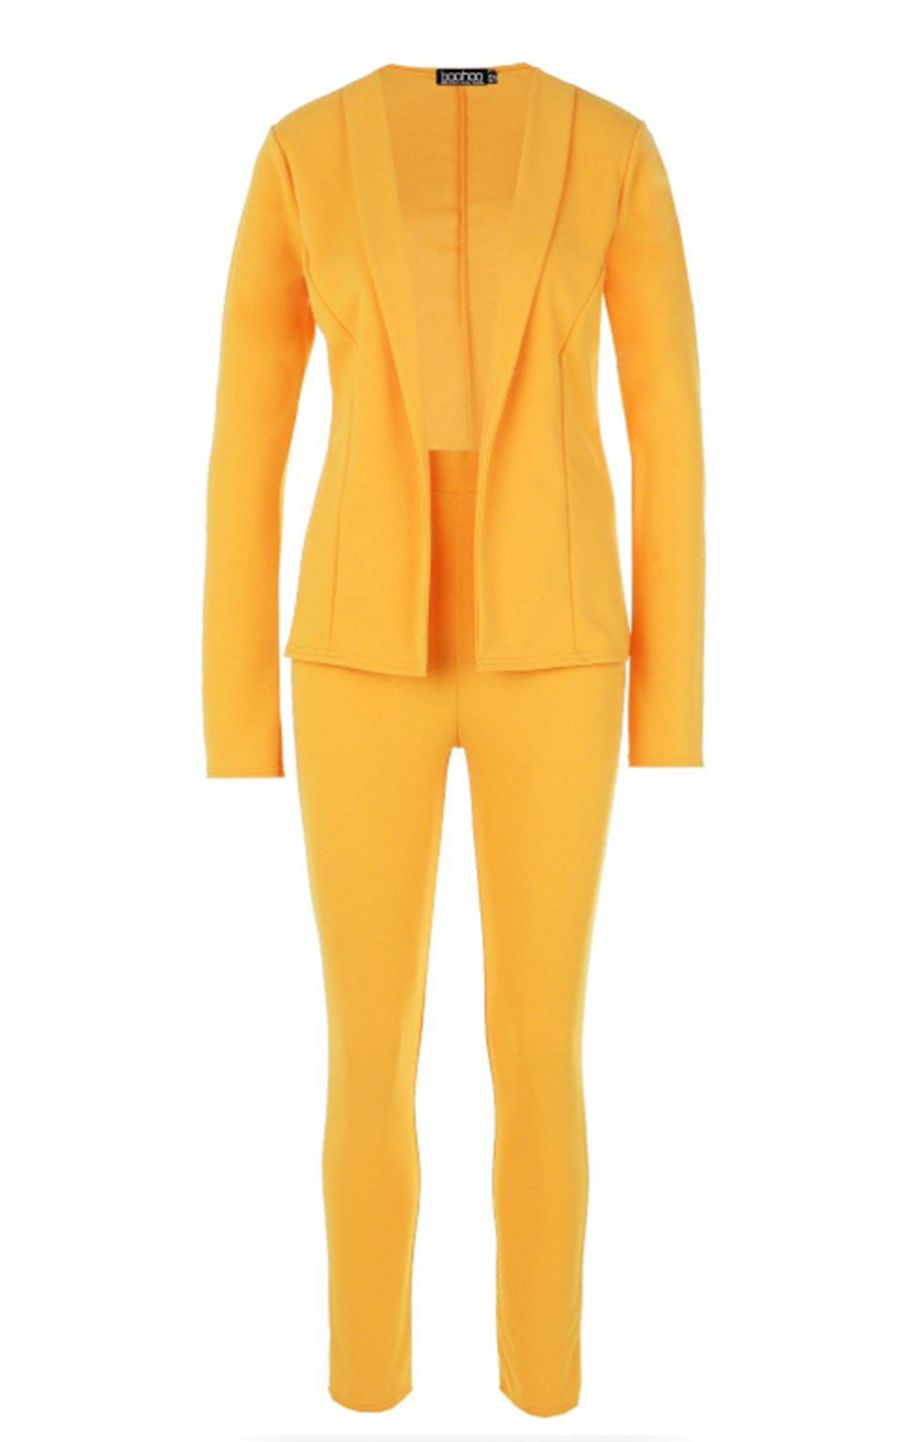 Clothing, Yellow, Orange, Suit, Outerwear, Sleeve, Neck, Jacket, Formal wear, Trousers, 